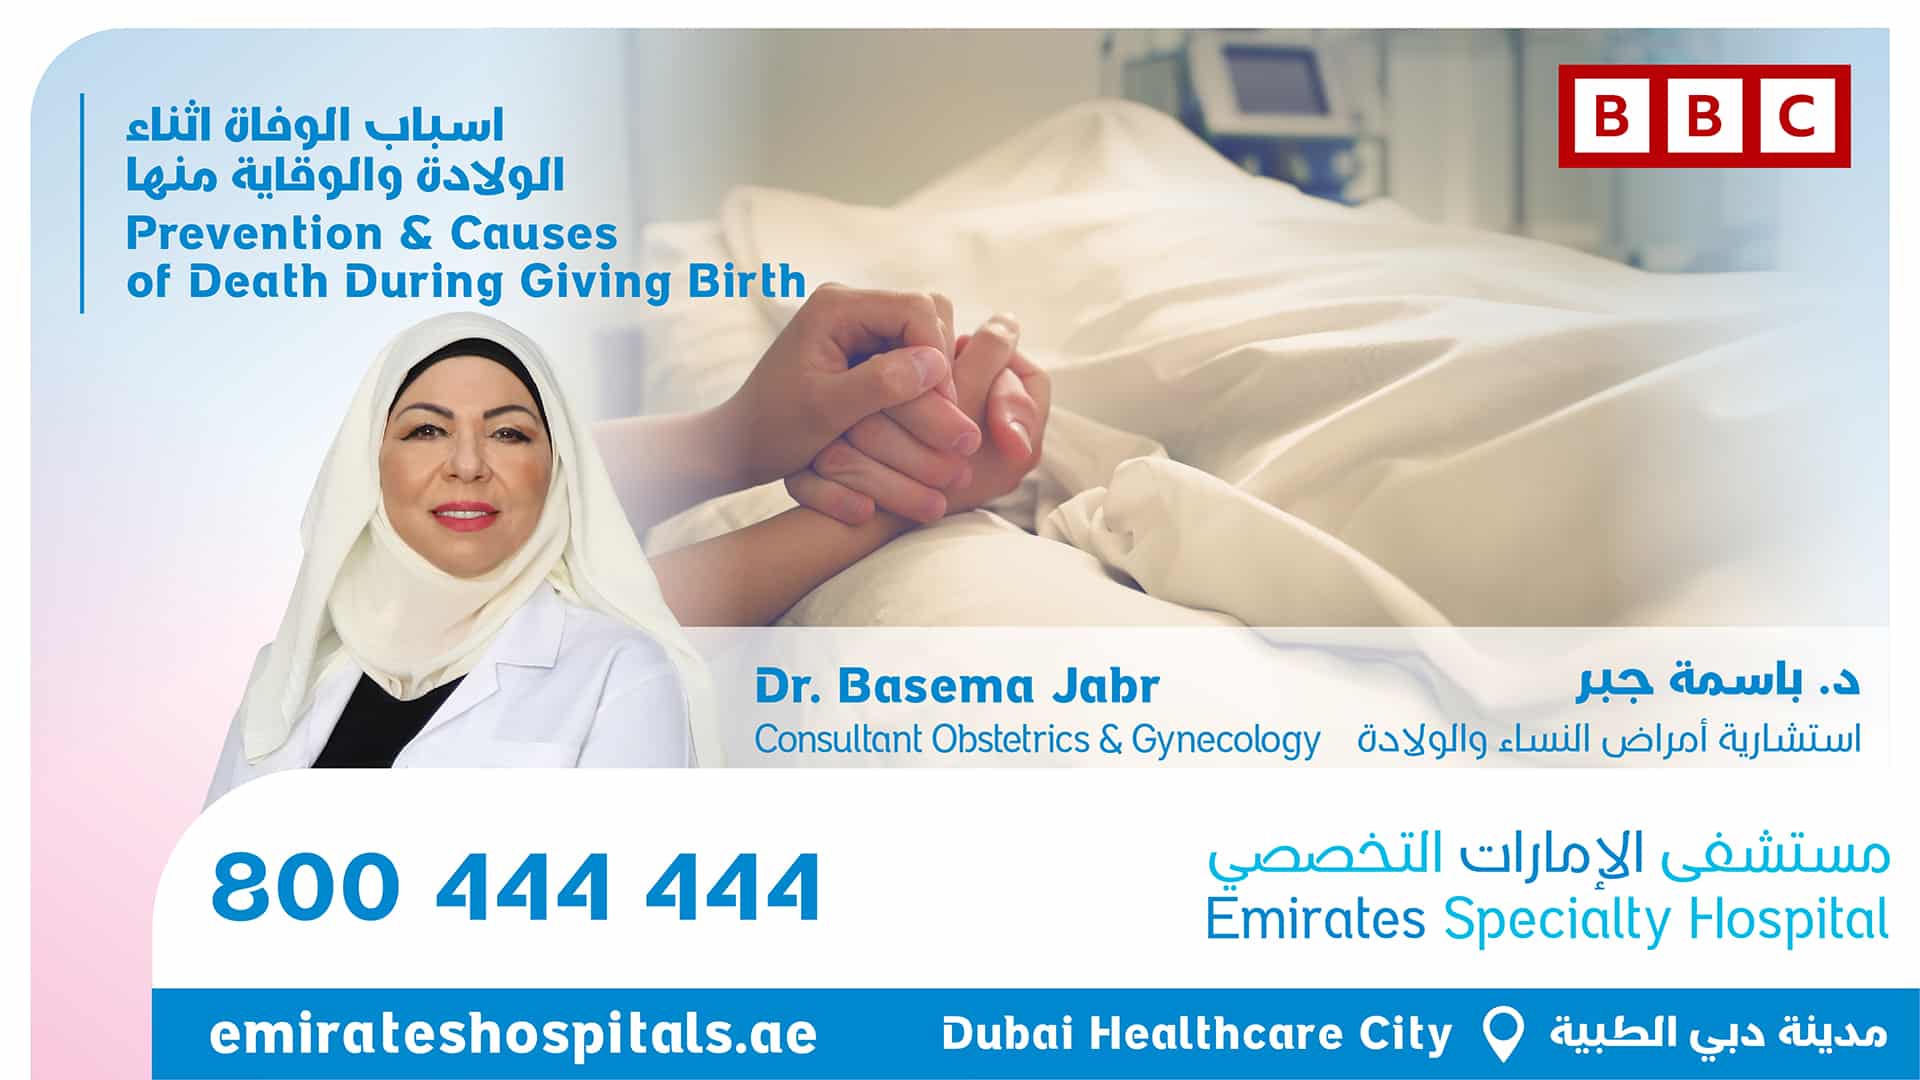 Prevention & Causes of Death During Giving Birth - Dr. Basema Jabr ,Consultant Obstetrics & Gynecology